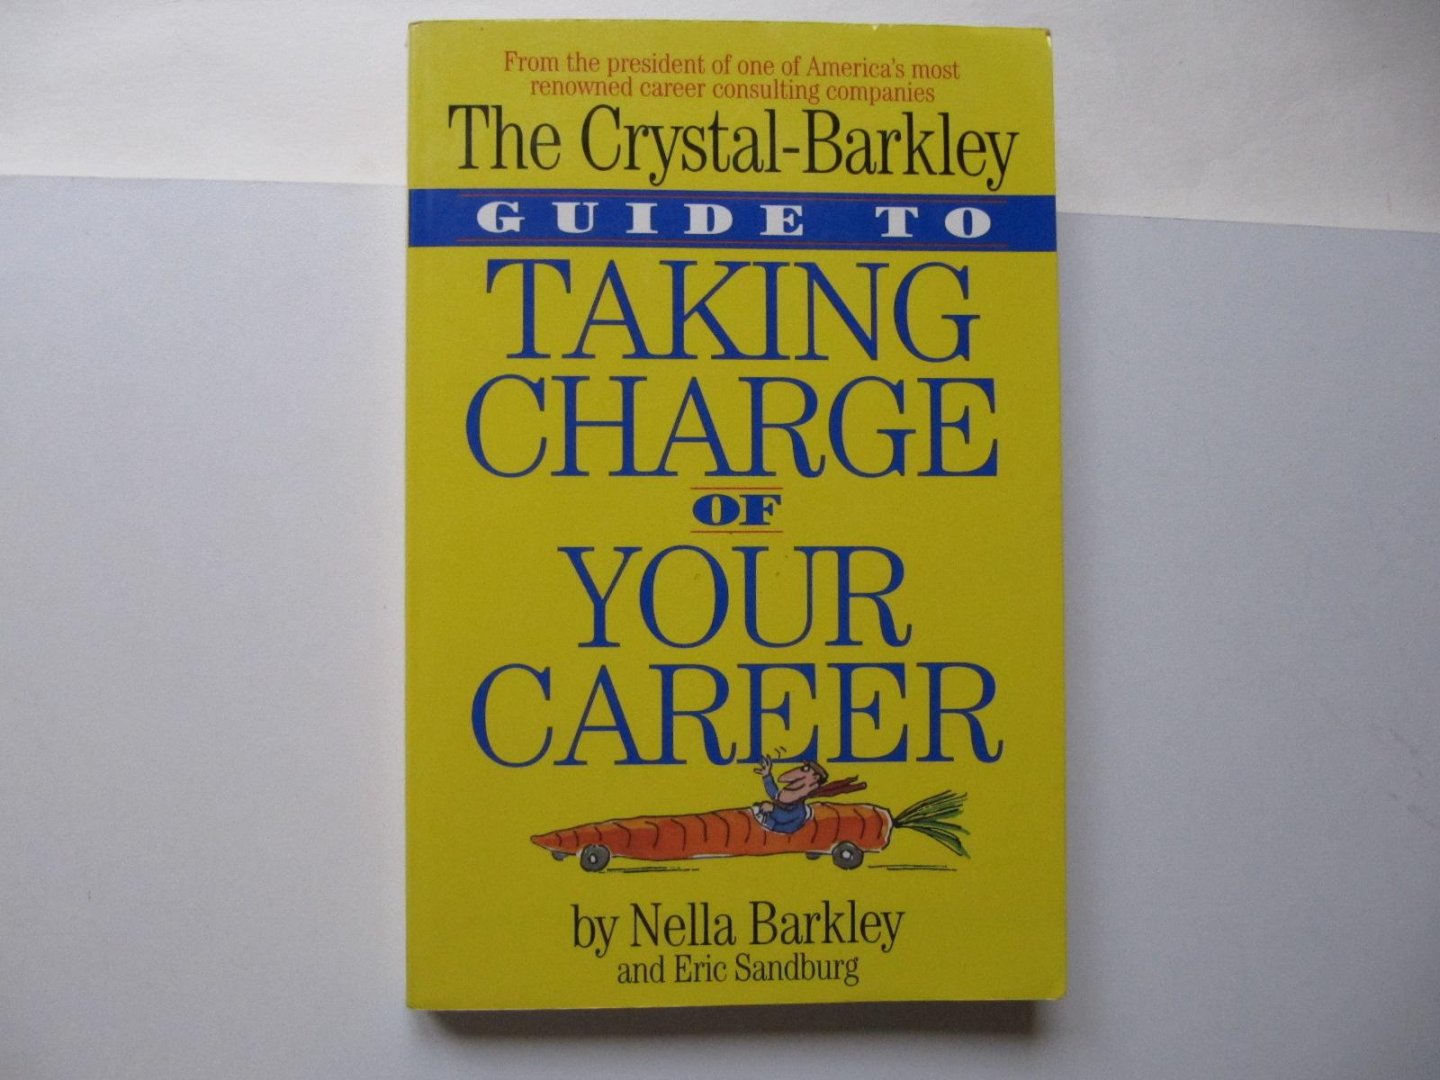 Barkley, Nella - The Crystal-Barkley Guide to Taking Charge of Your Career